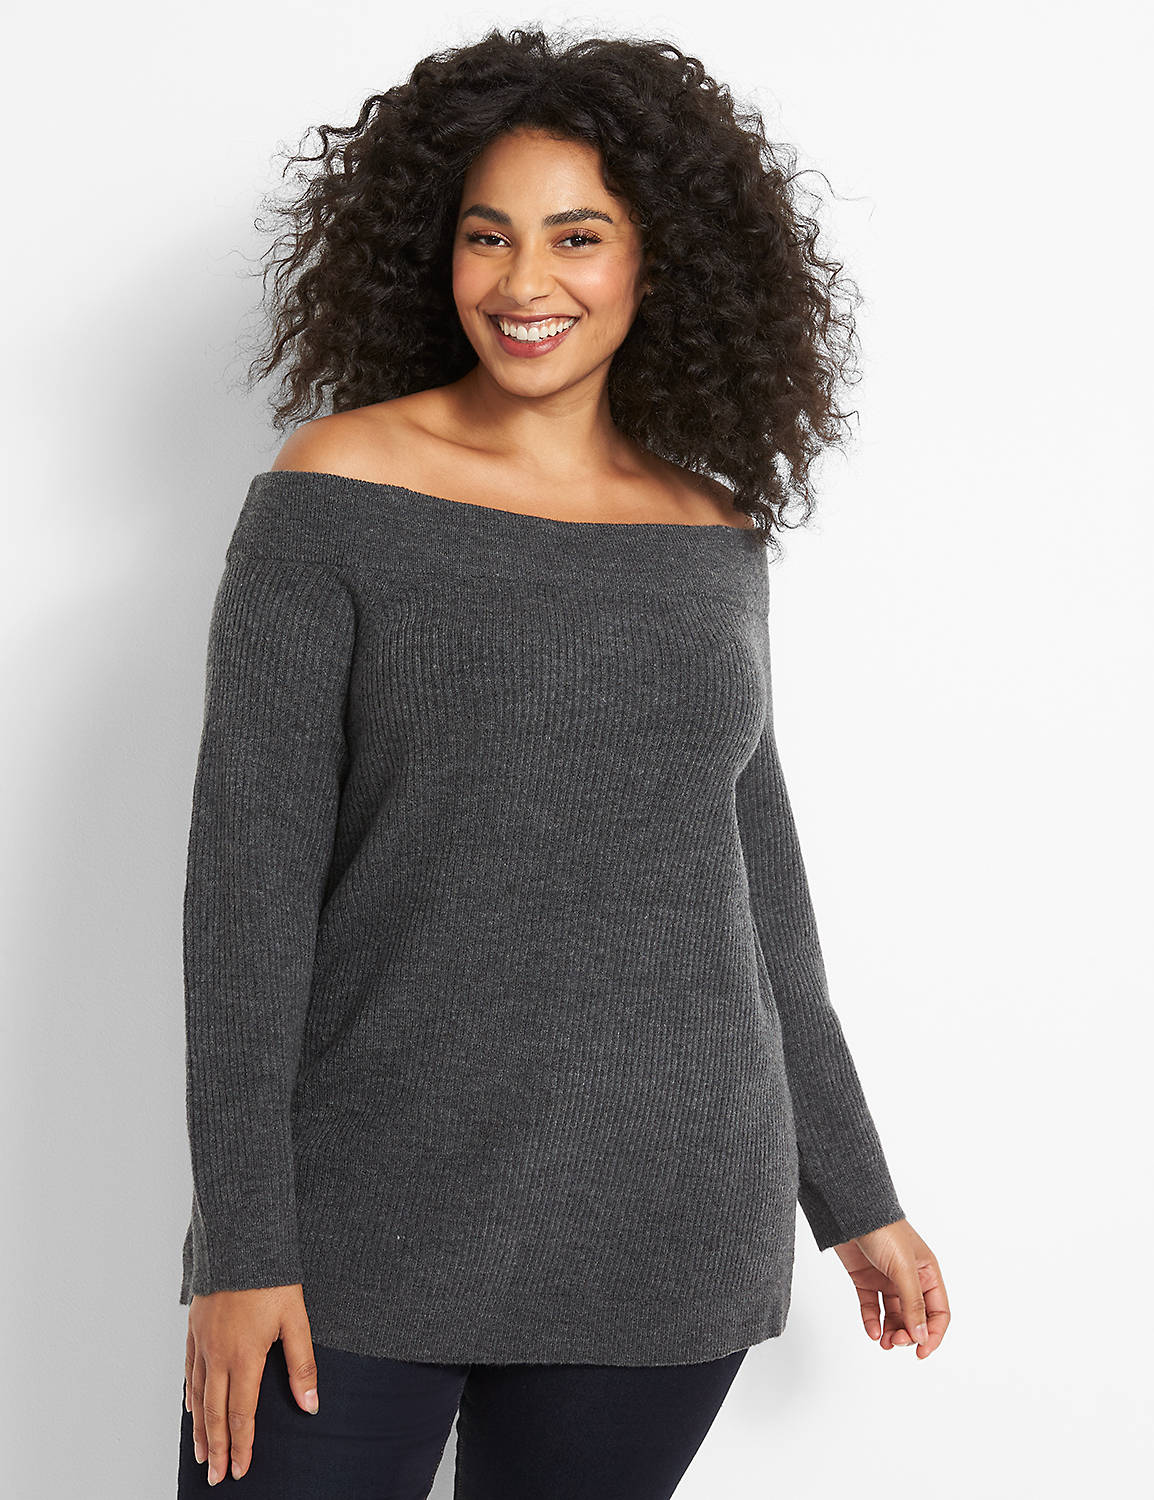 Off-The-Shoulder Sweater Product Image 1